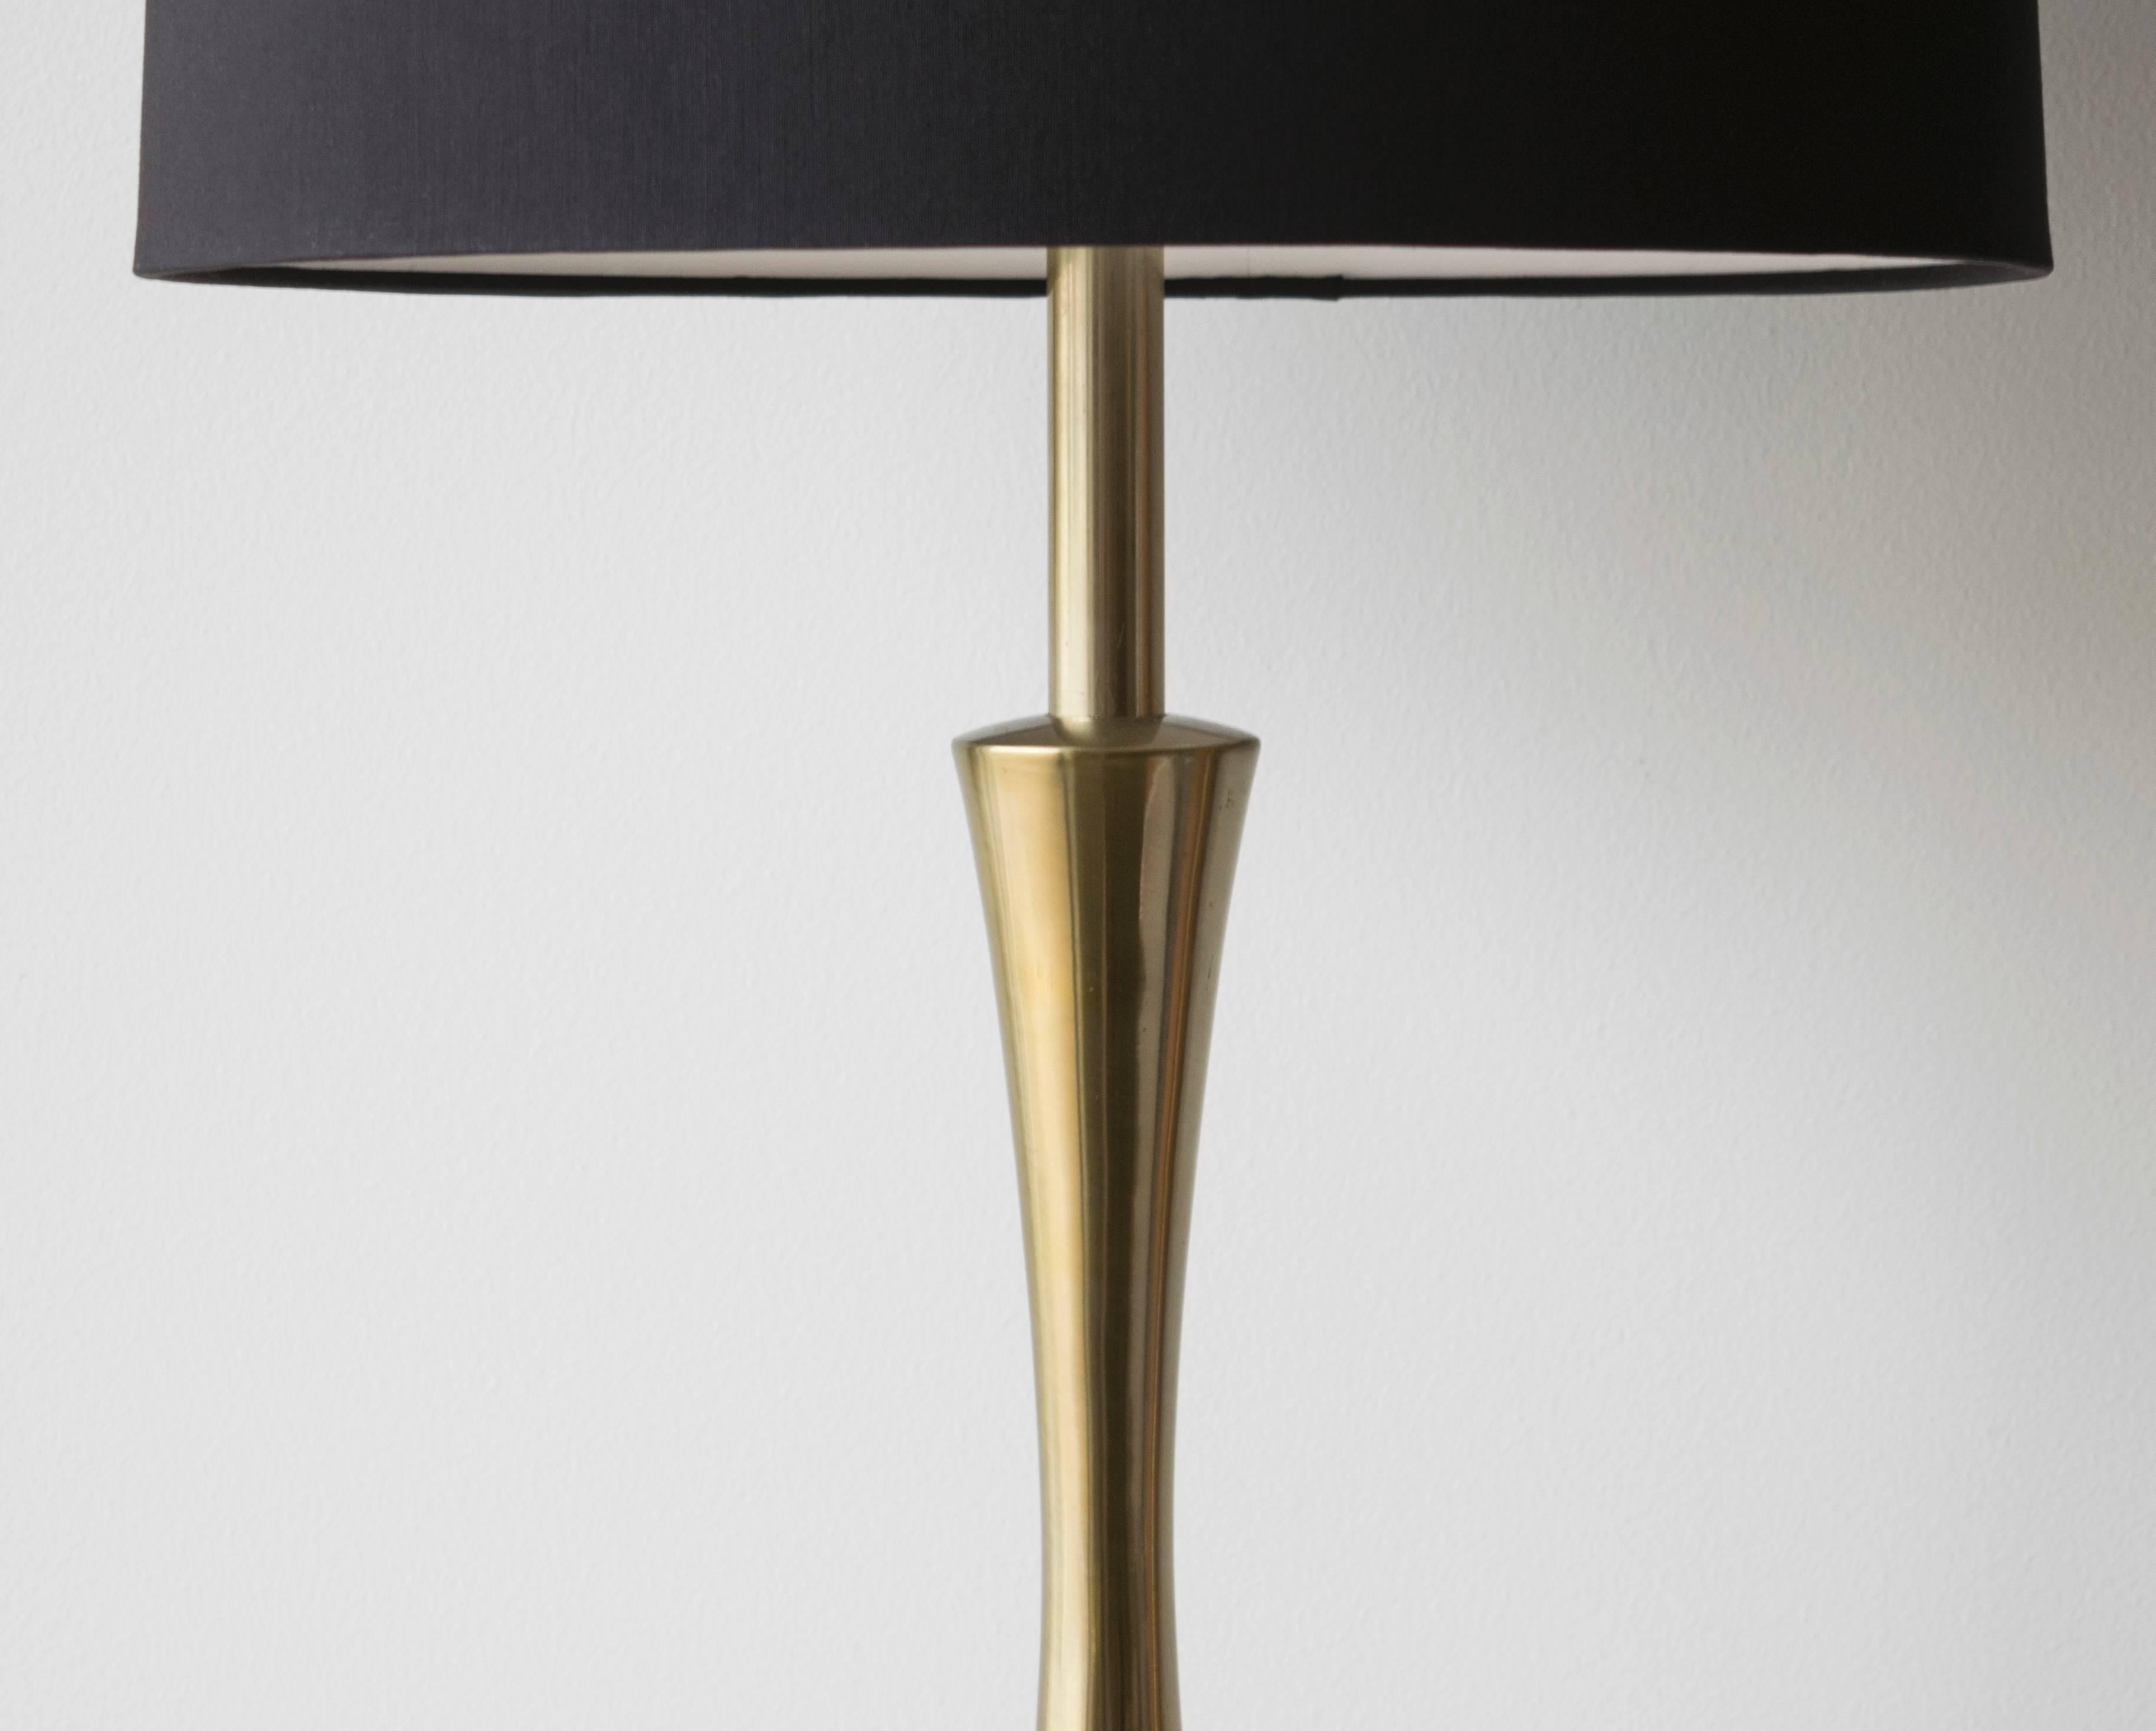 This pair of lamps designed by Maurizio Tempestini is fabulous! The base is octagonal shaped with a contrasting triangle of volcanic and smooth brass which tapers up into a long graceful neck.